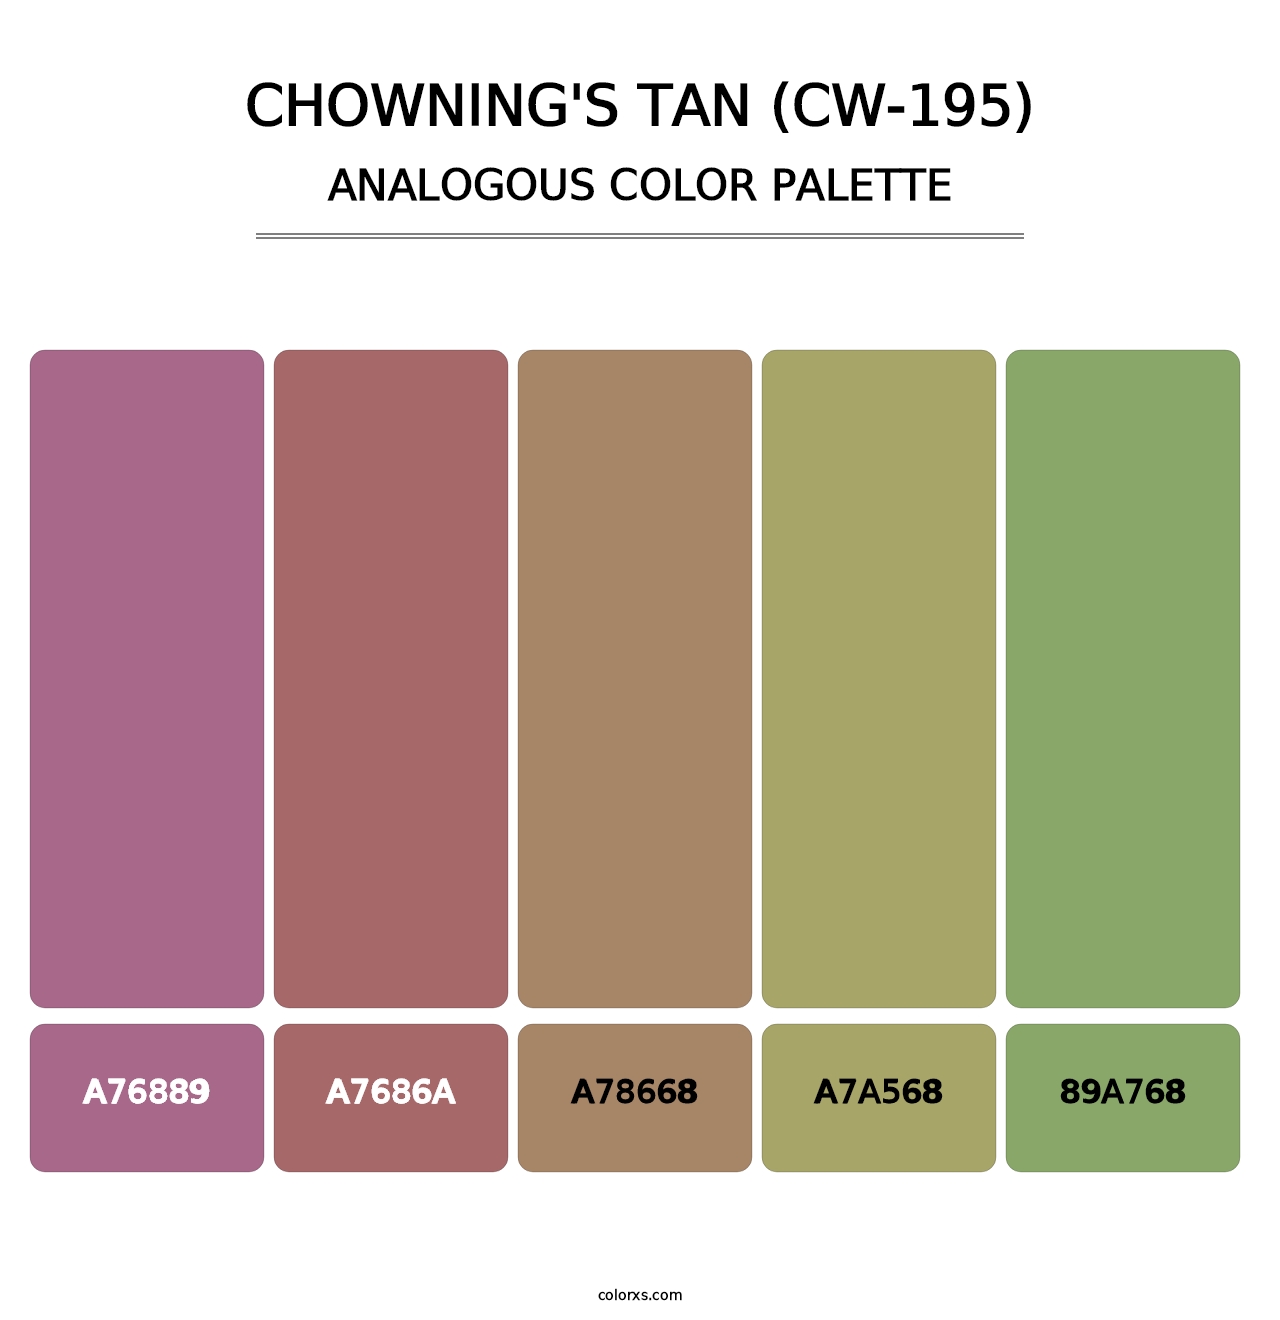 Chowning's Tan (CW-195) - Analogous Color Palette